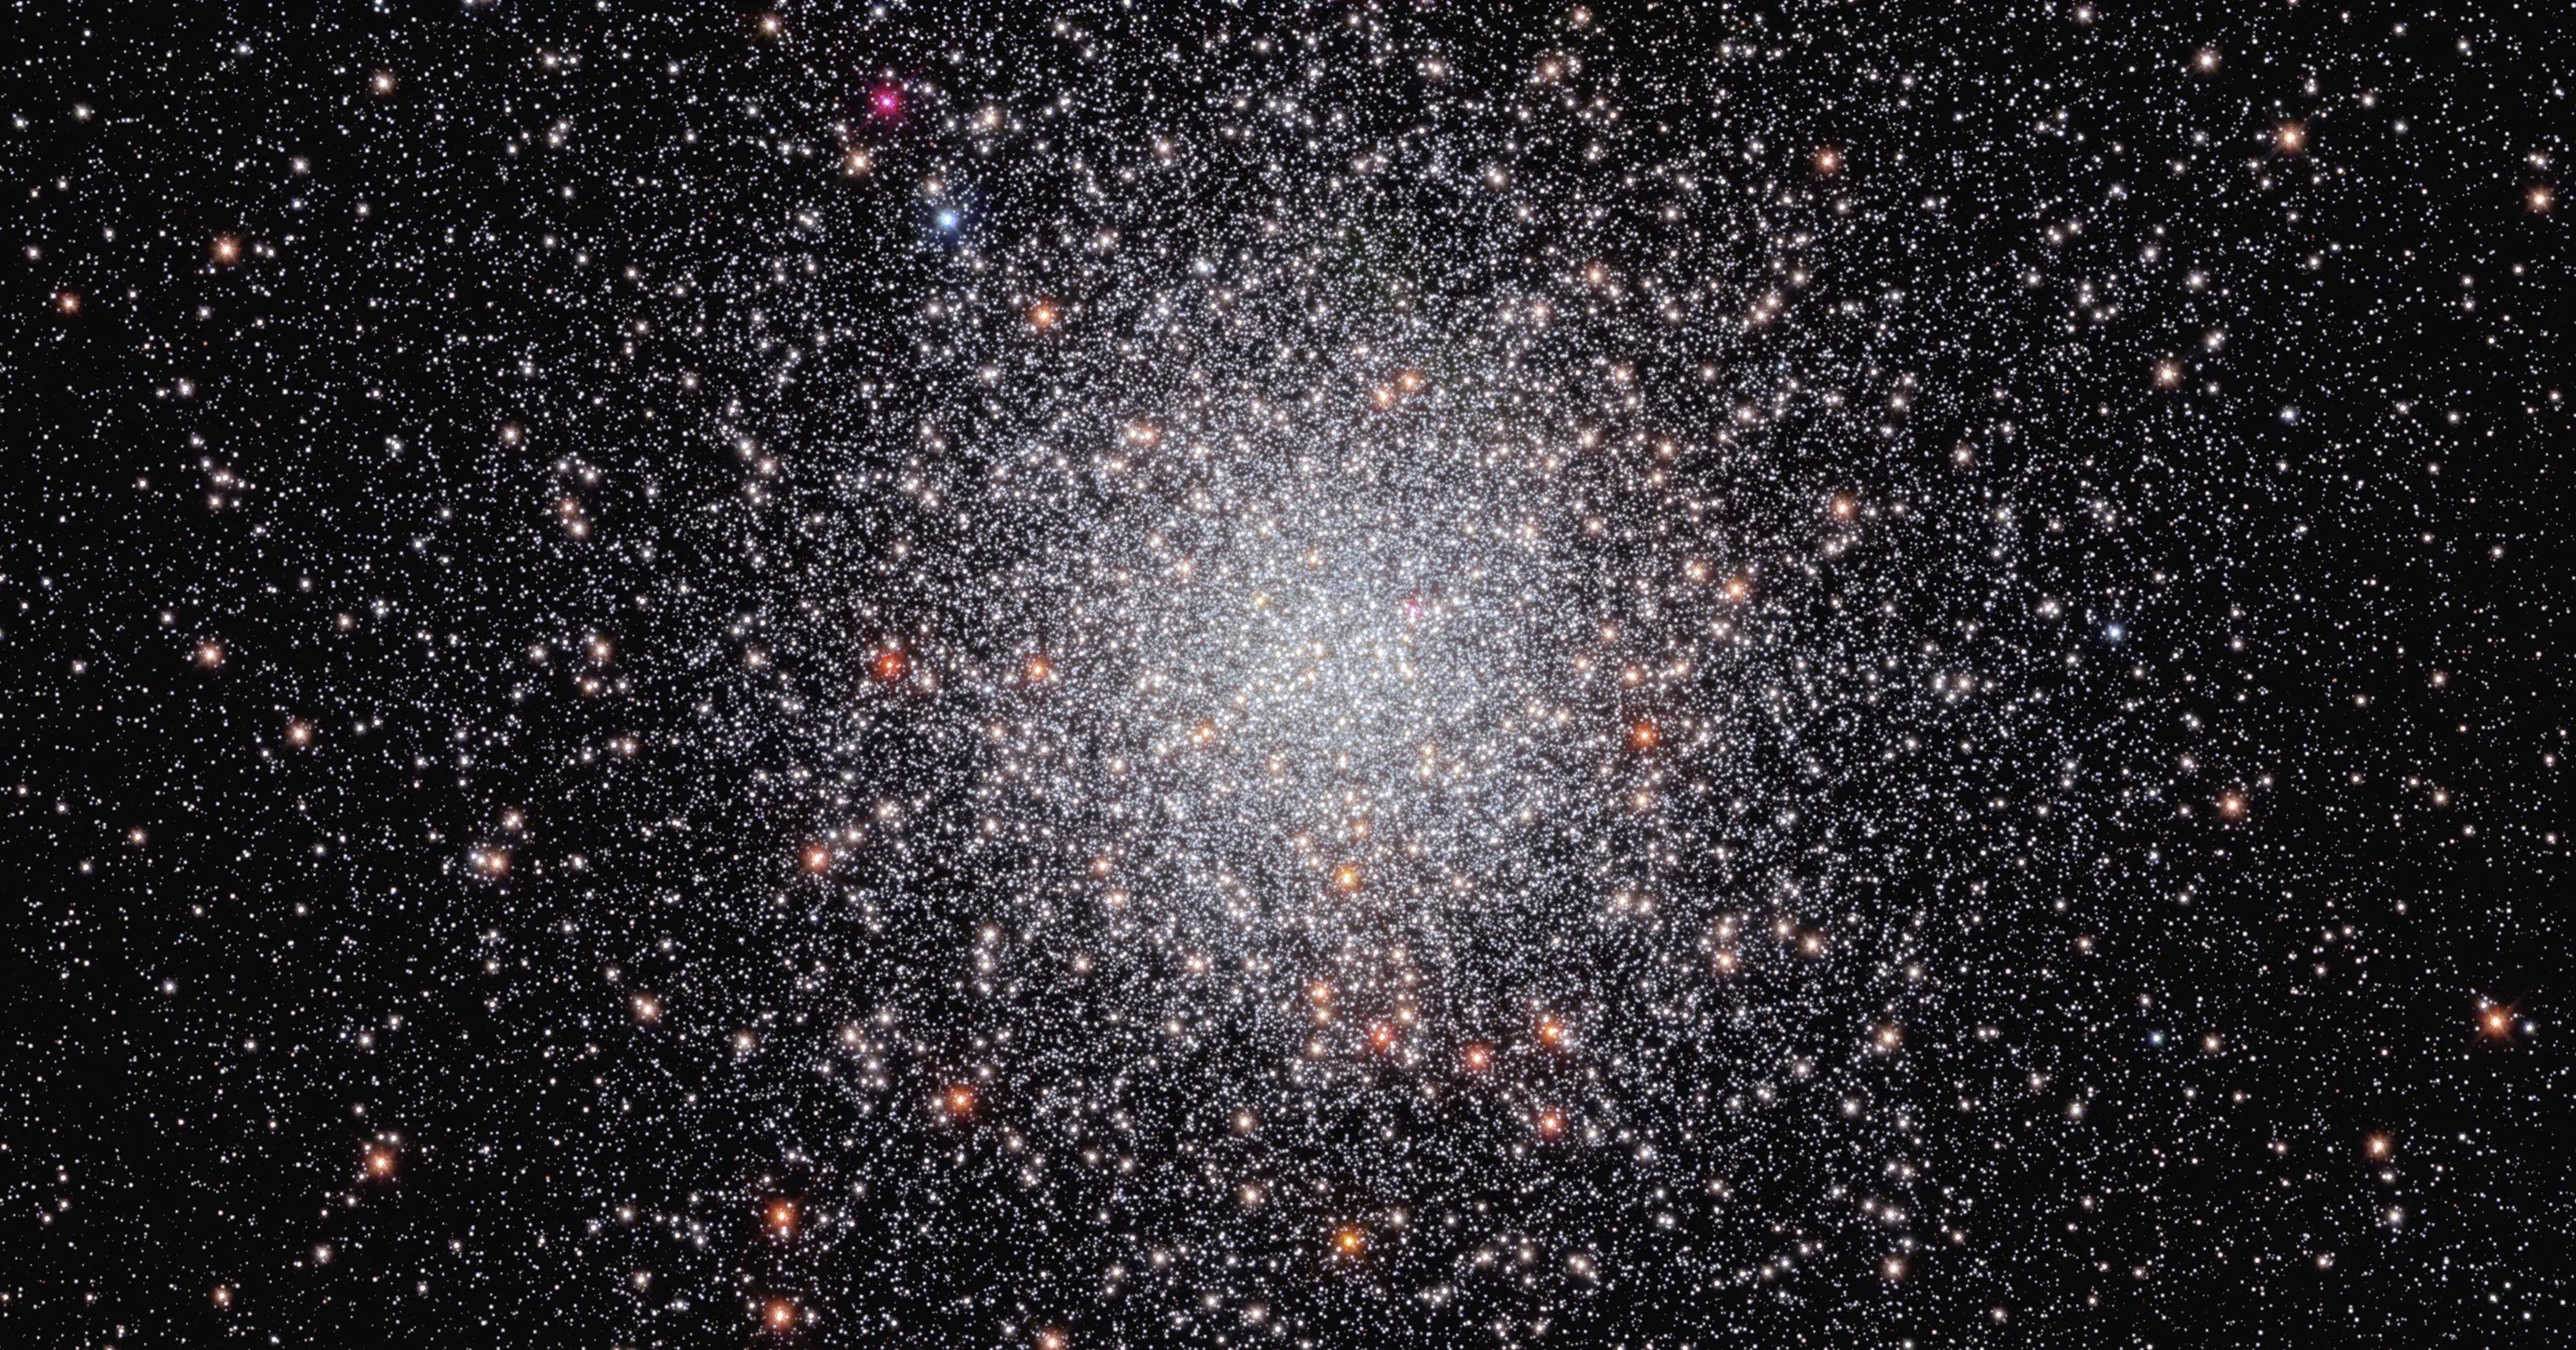 Center of the image is filled with a sphere of white stars. a smattering of orang-white stars dots the sphere. they are set against a black background that holds a smattering of stars.